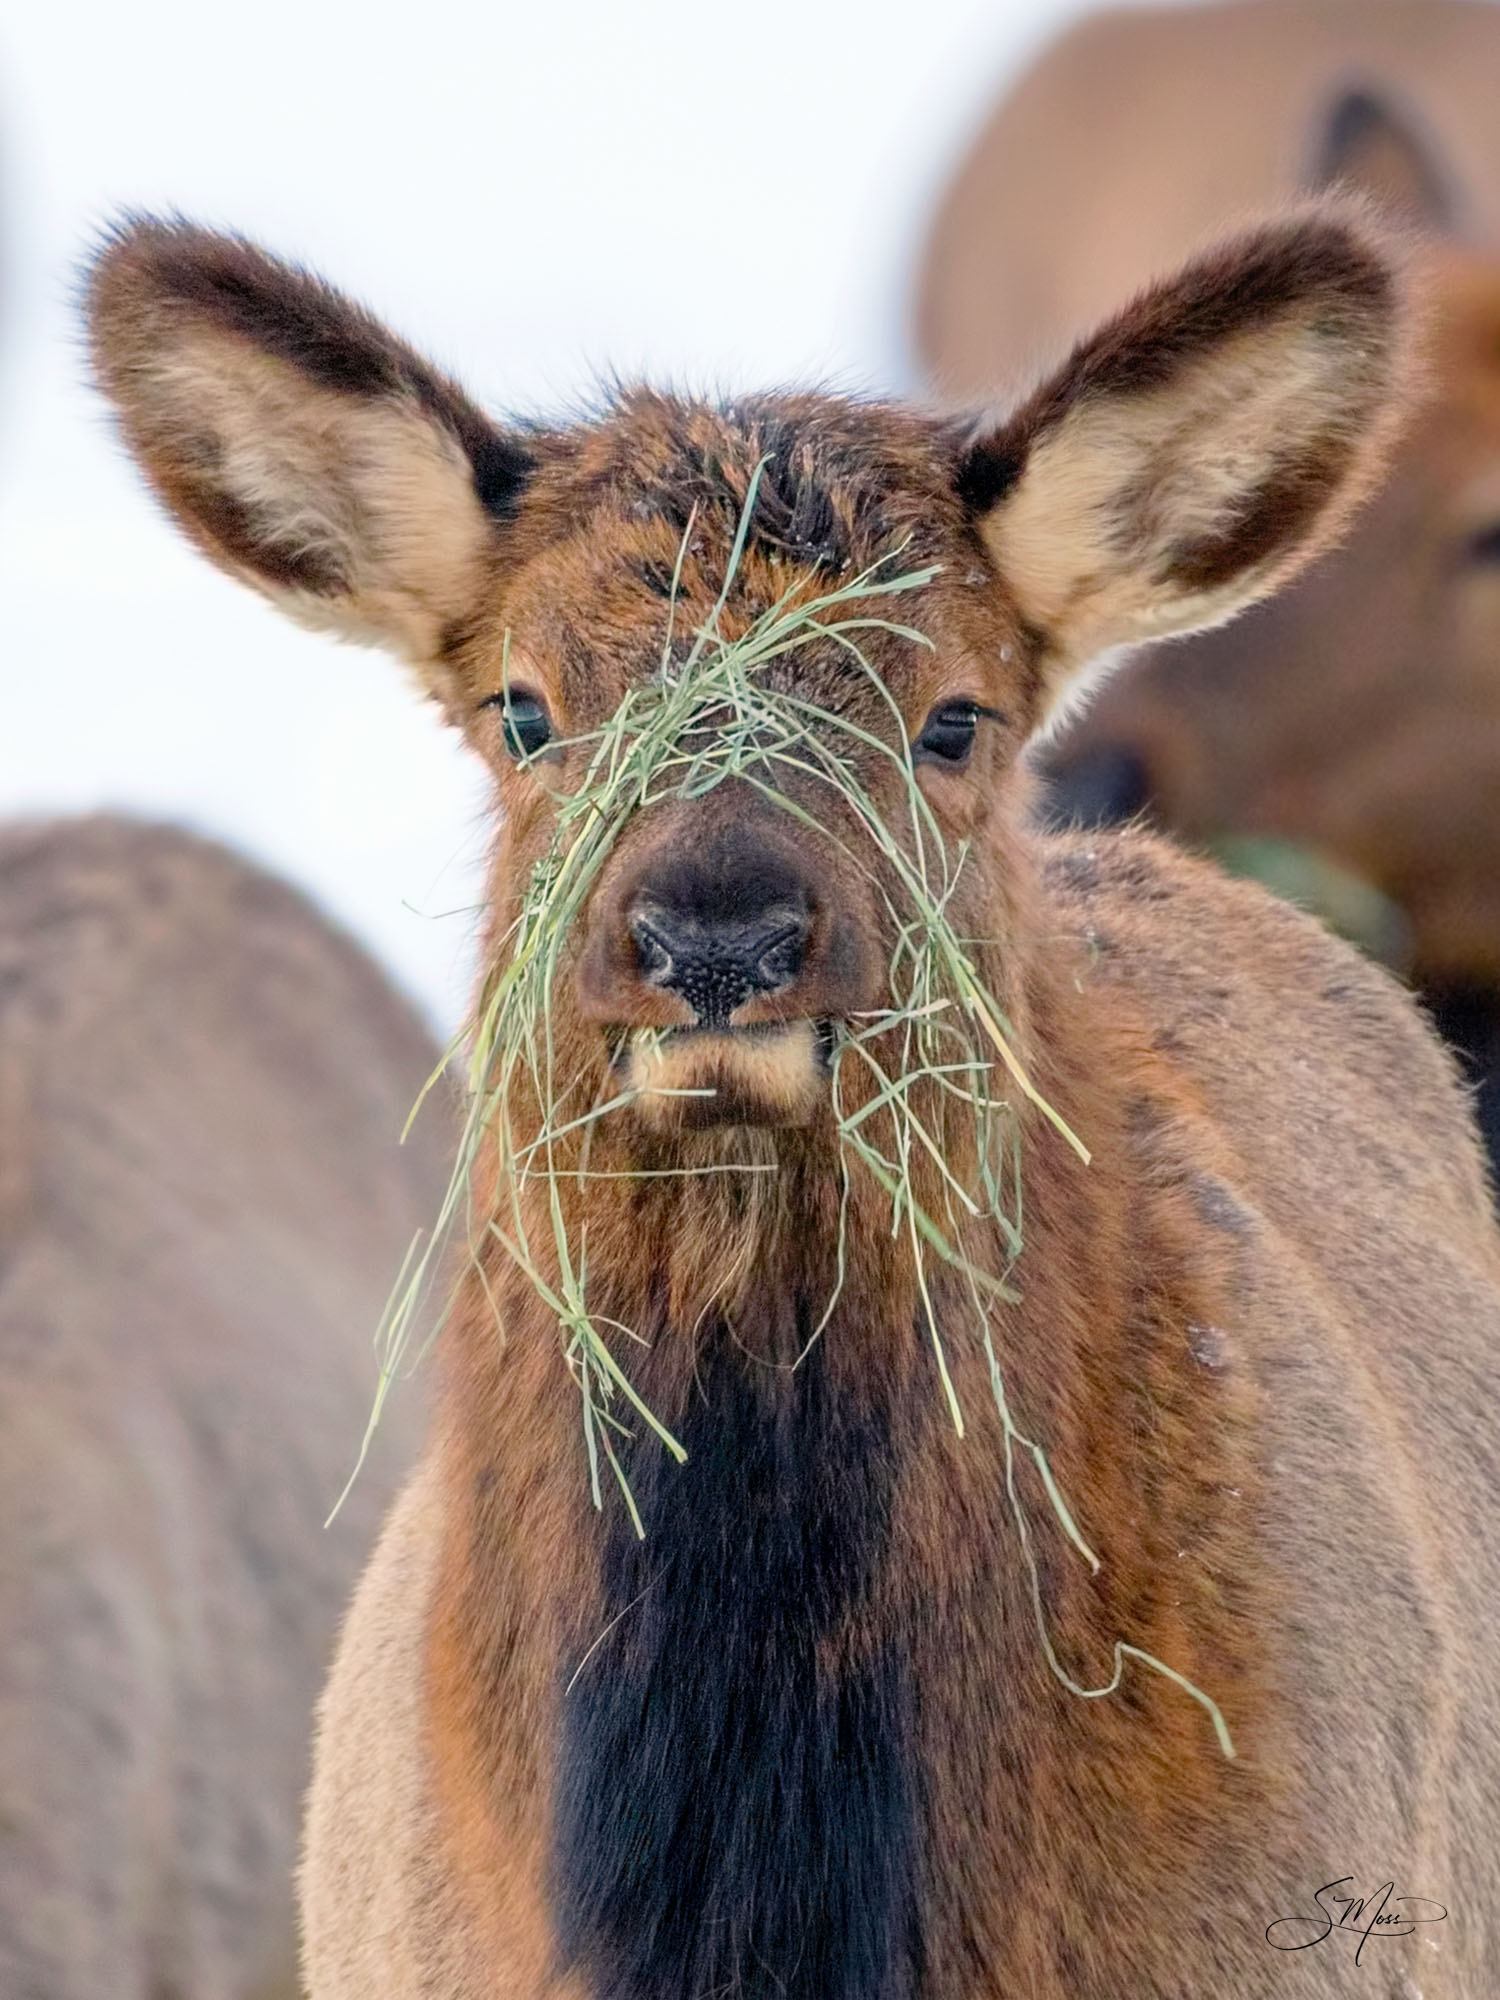 Baby Elk with grass on face eating in Winter